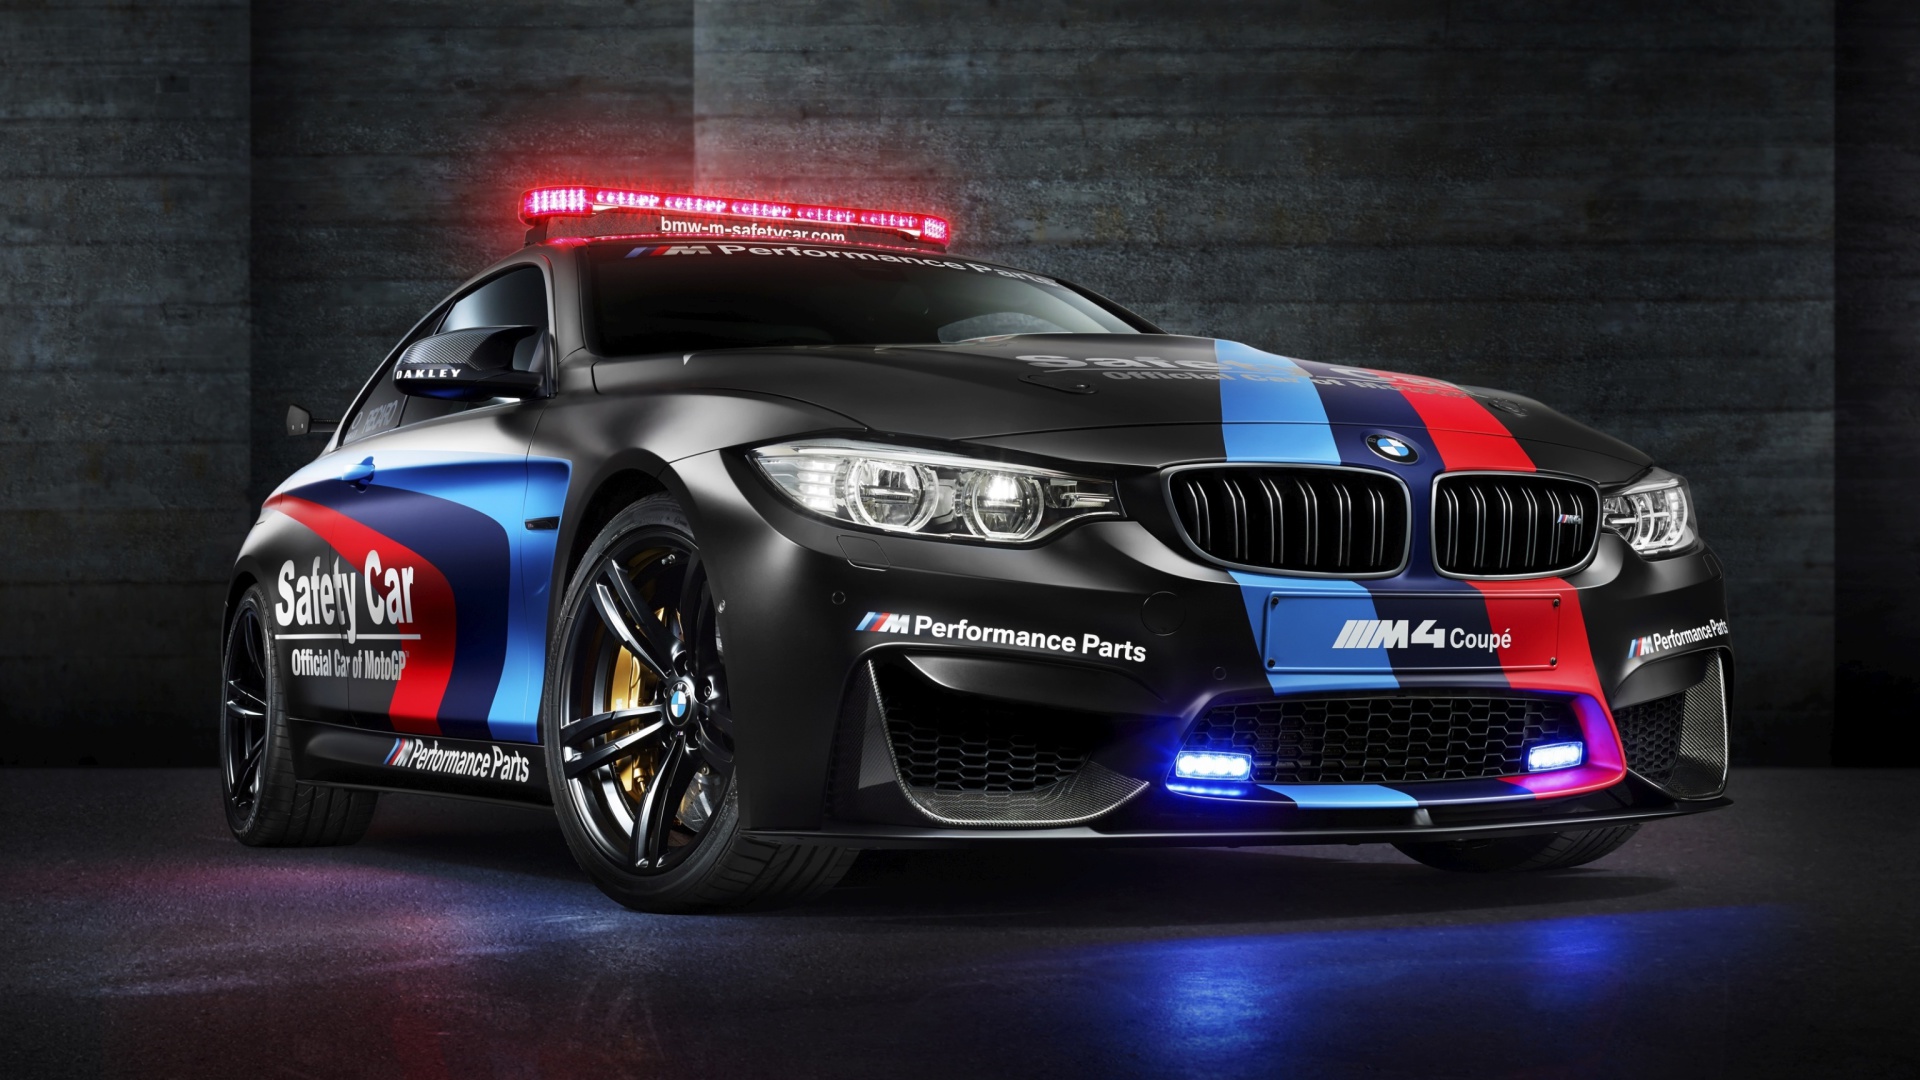 BMW M4 Coupe Police wallpaper 1920x1080